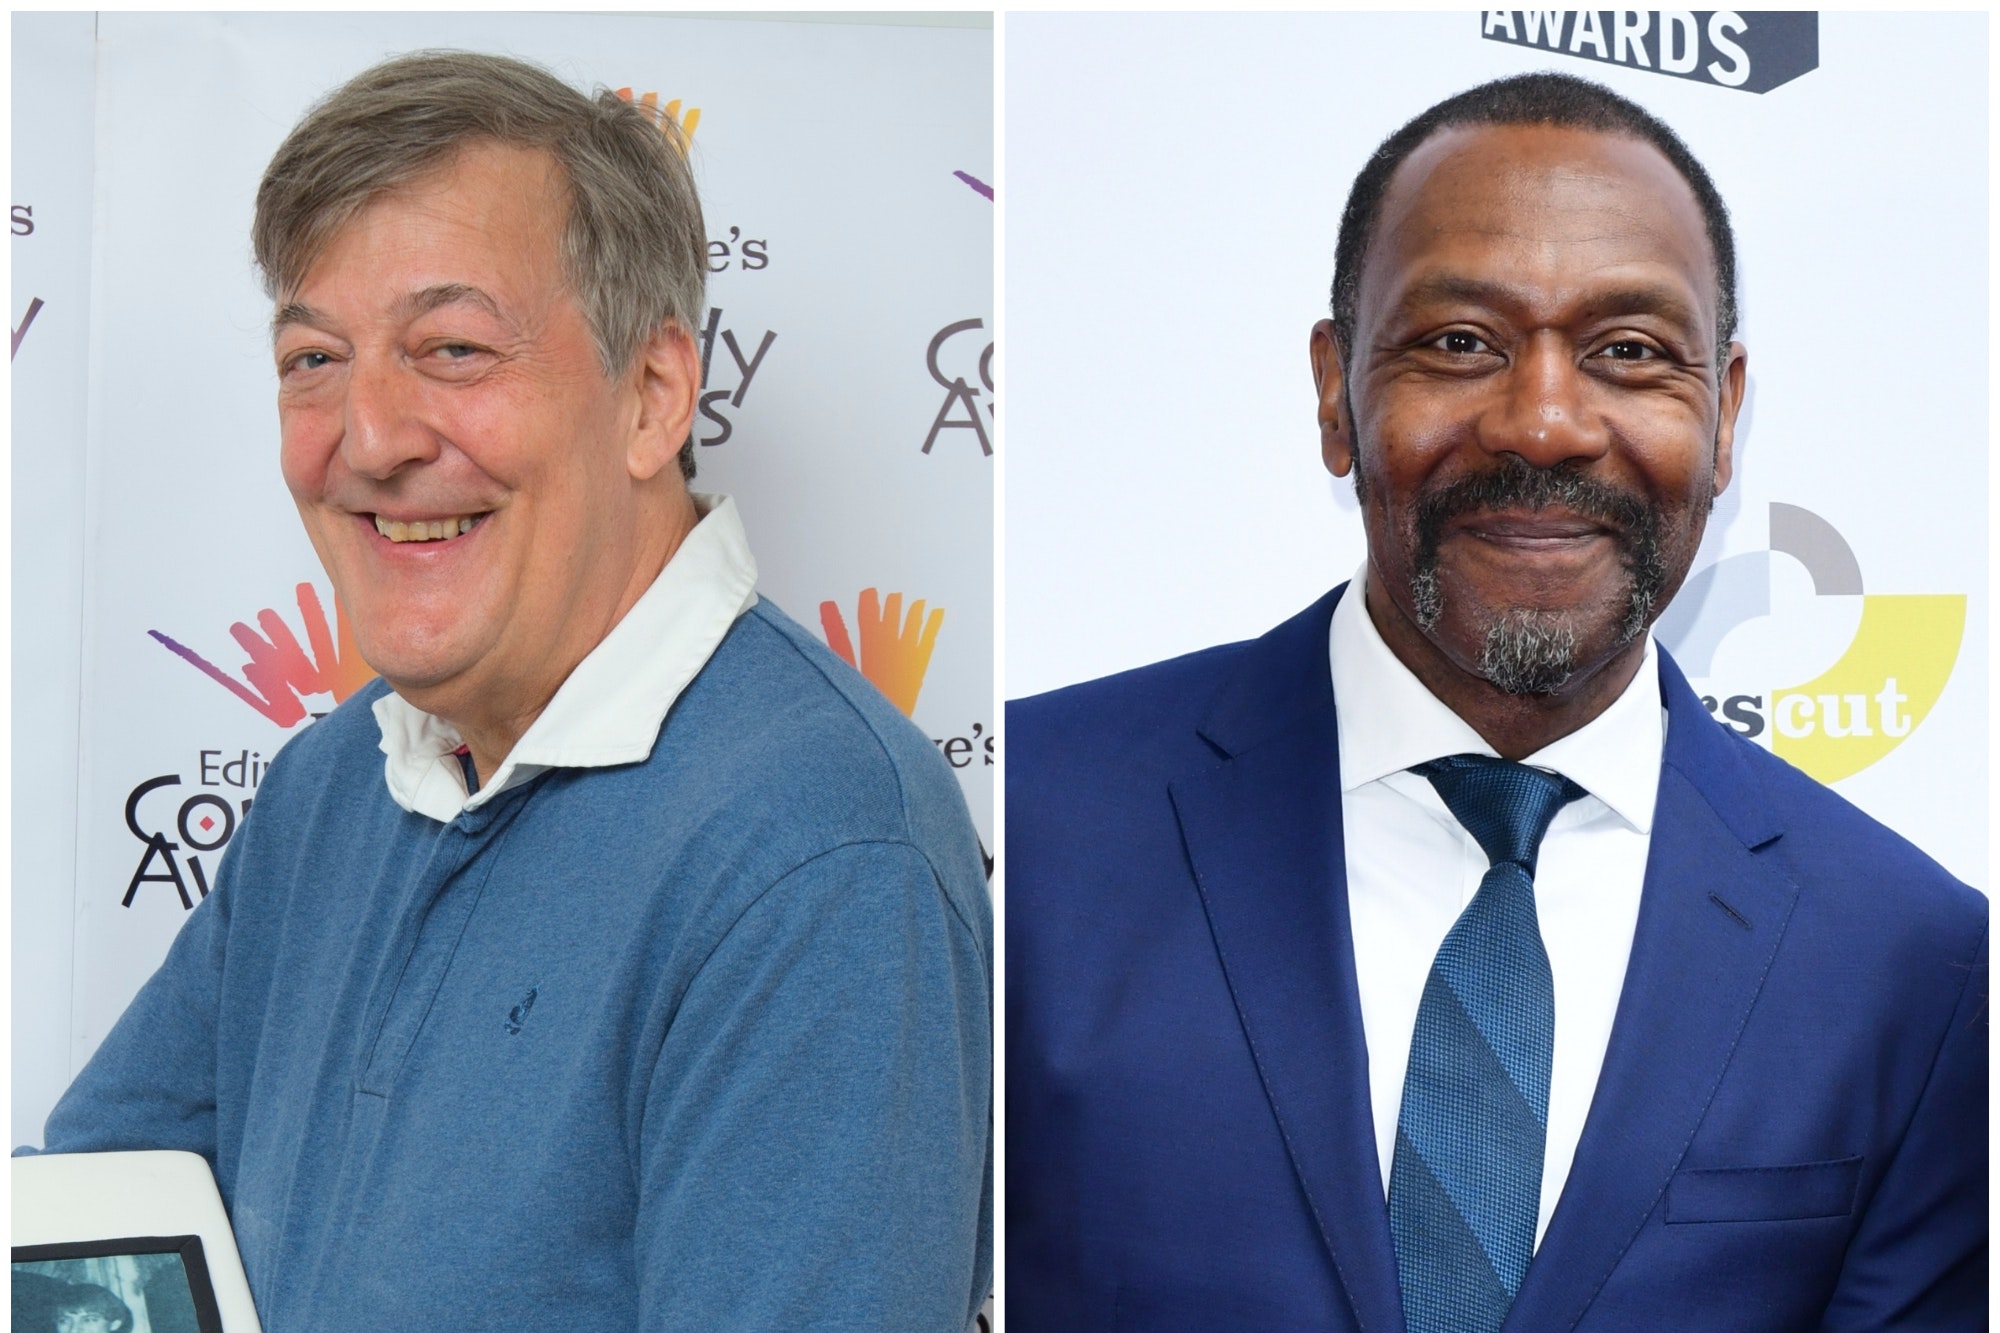 Sir Lenny Henry and Stephen Fry land ‘major’ Doctor Who roles